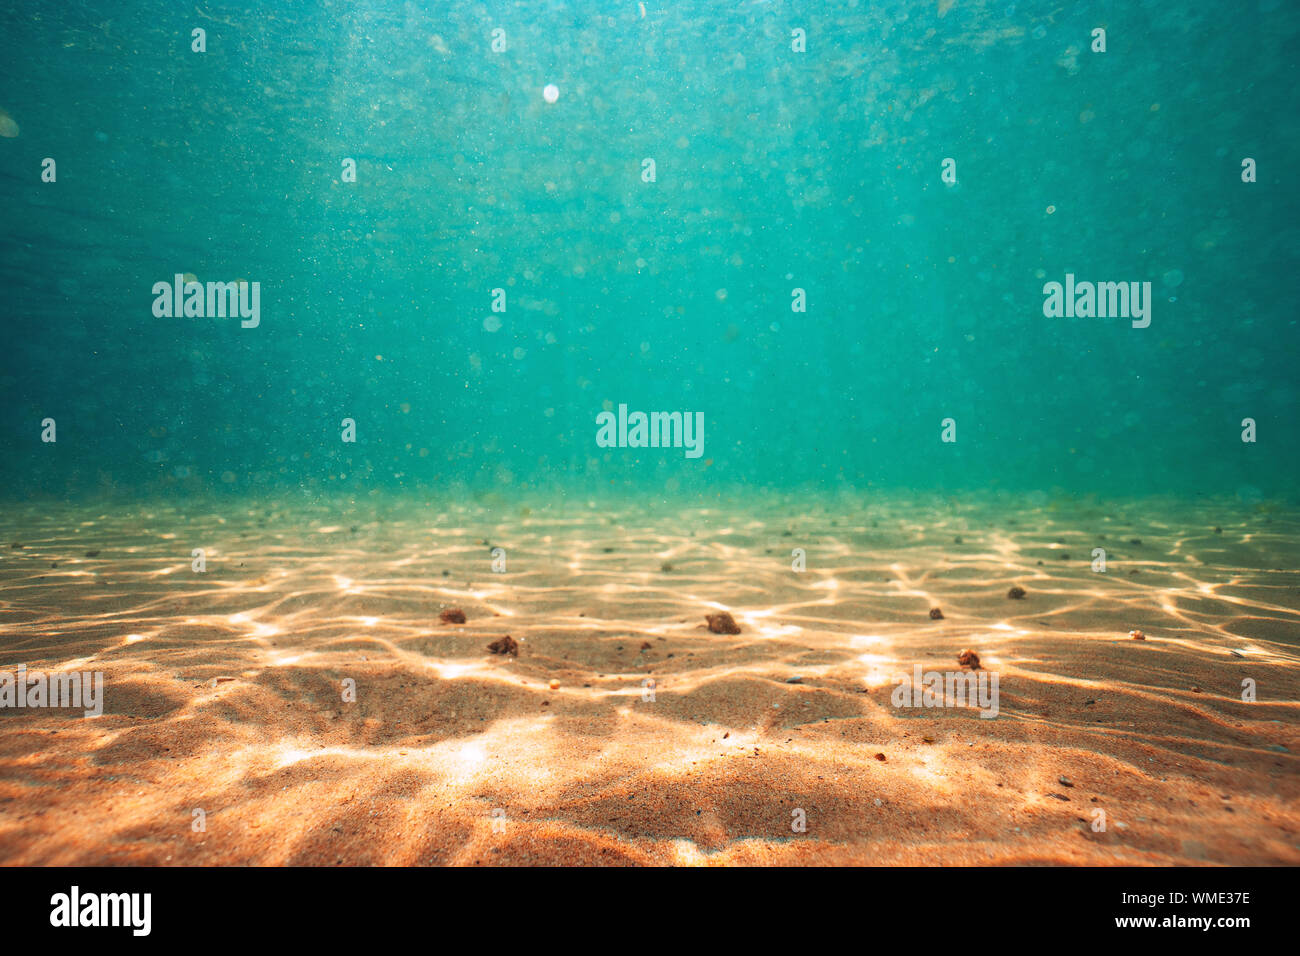 Sea sand and blue water. Underwater. ocean background. Stock Photo